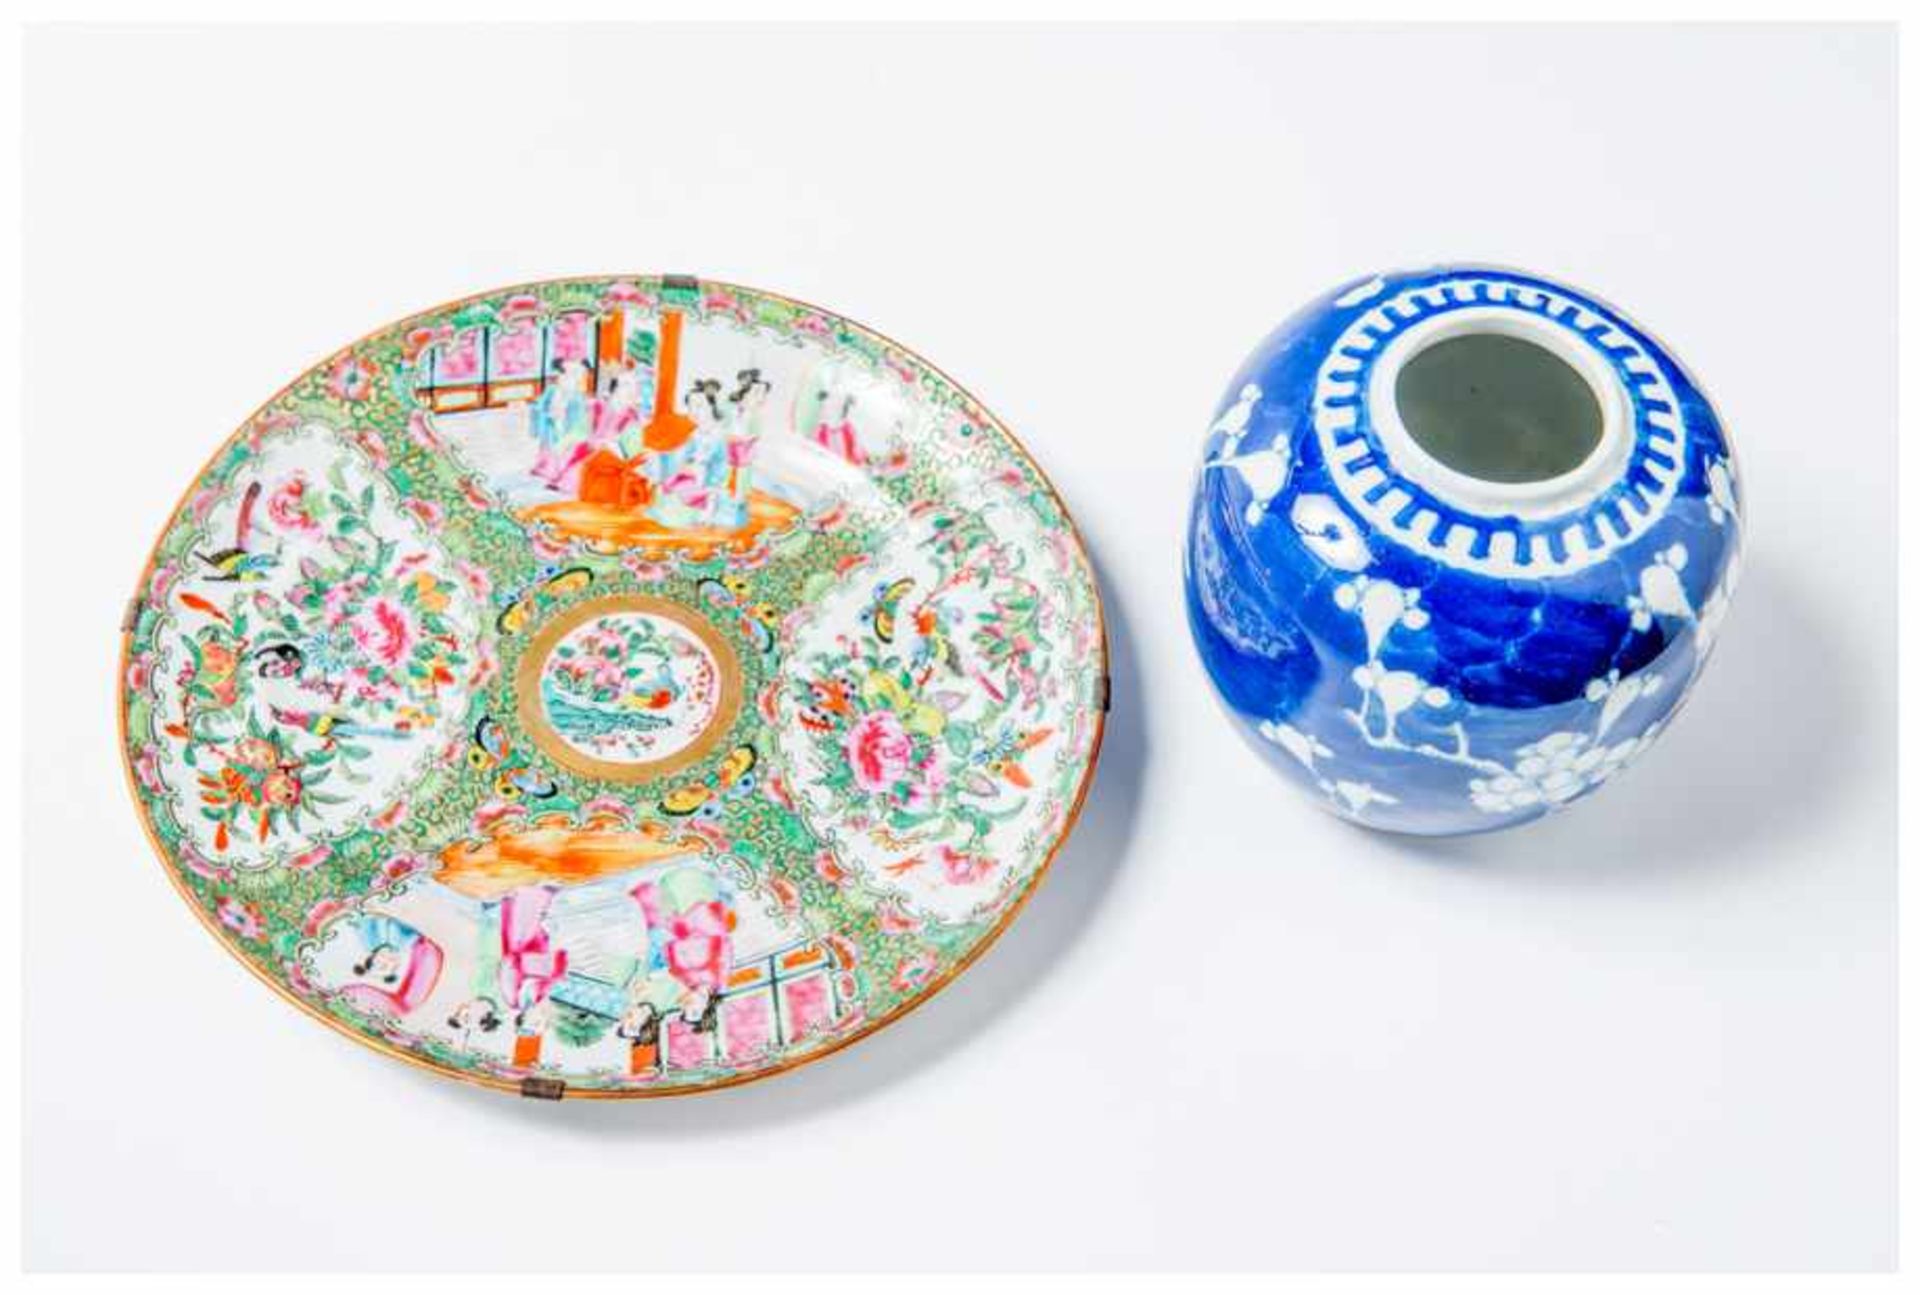 A PLATE AND A GINGER POT Porcelain. China, Qing dynasty to 20th centuryThe plate is made from